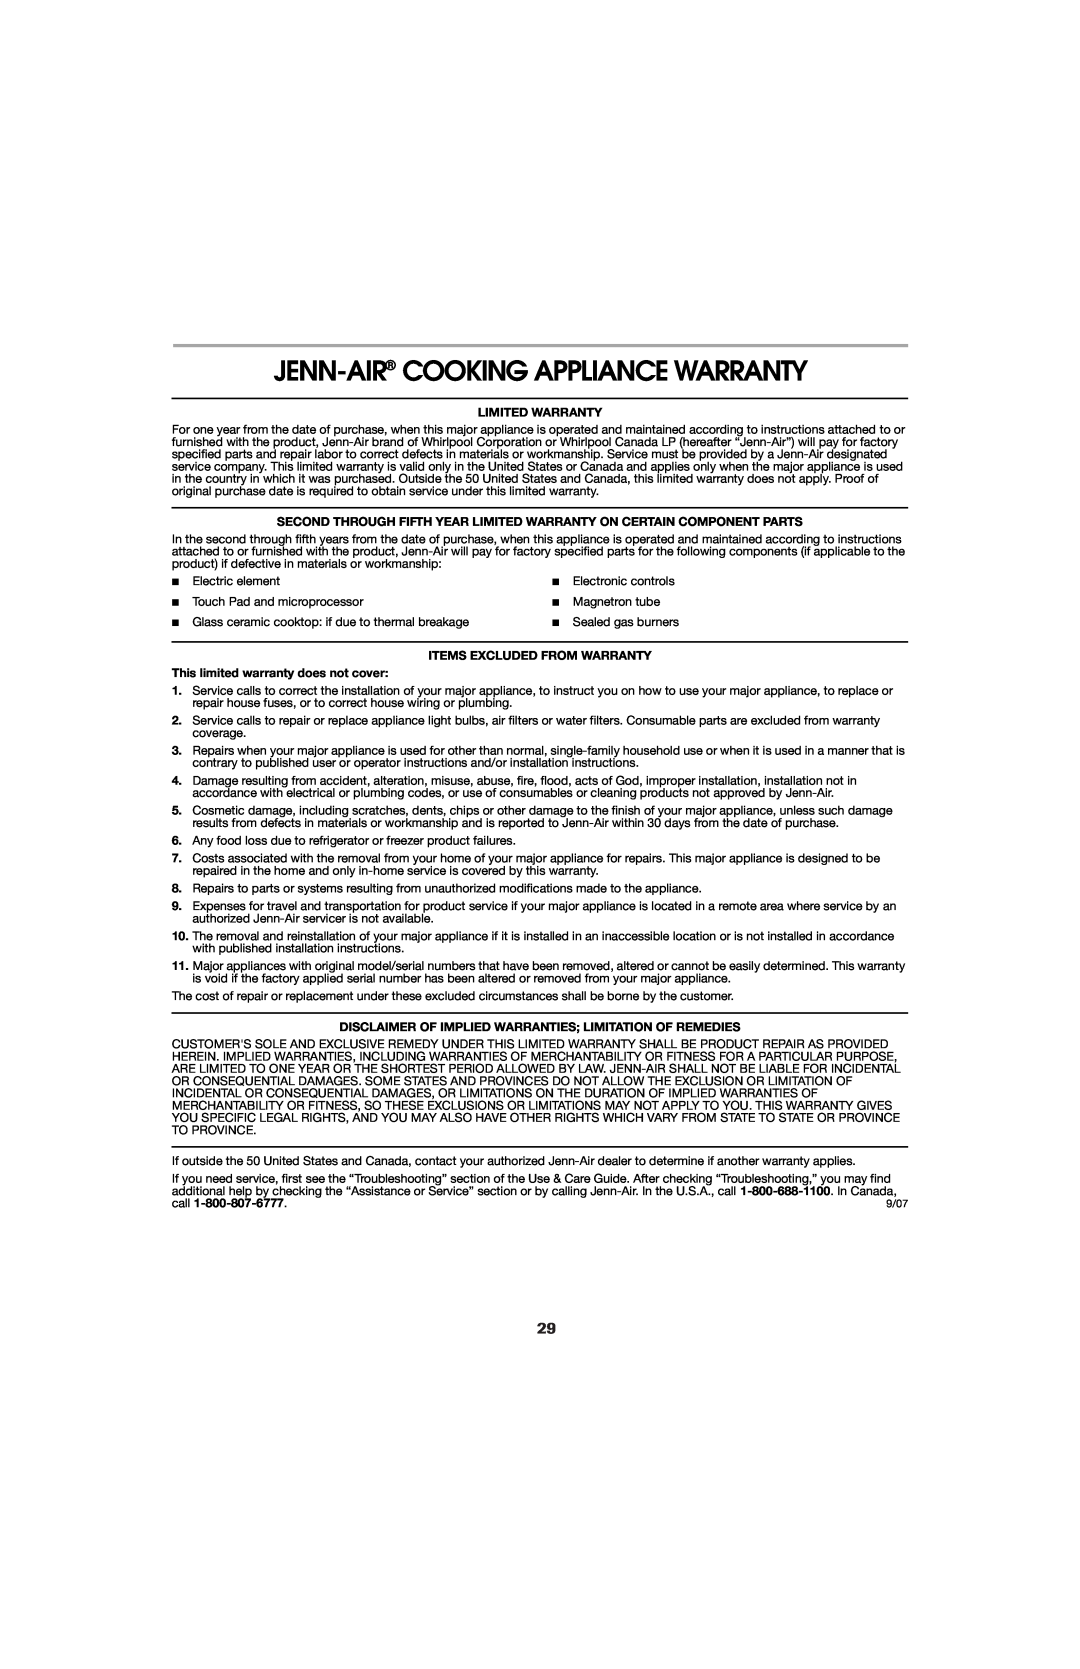 Jenn-Air 8113P714-60 important safety instructions Jenn-Air Cooking Appliance Warranty, Limited Warranty, call 